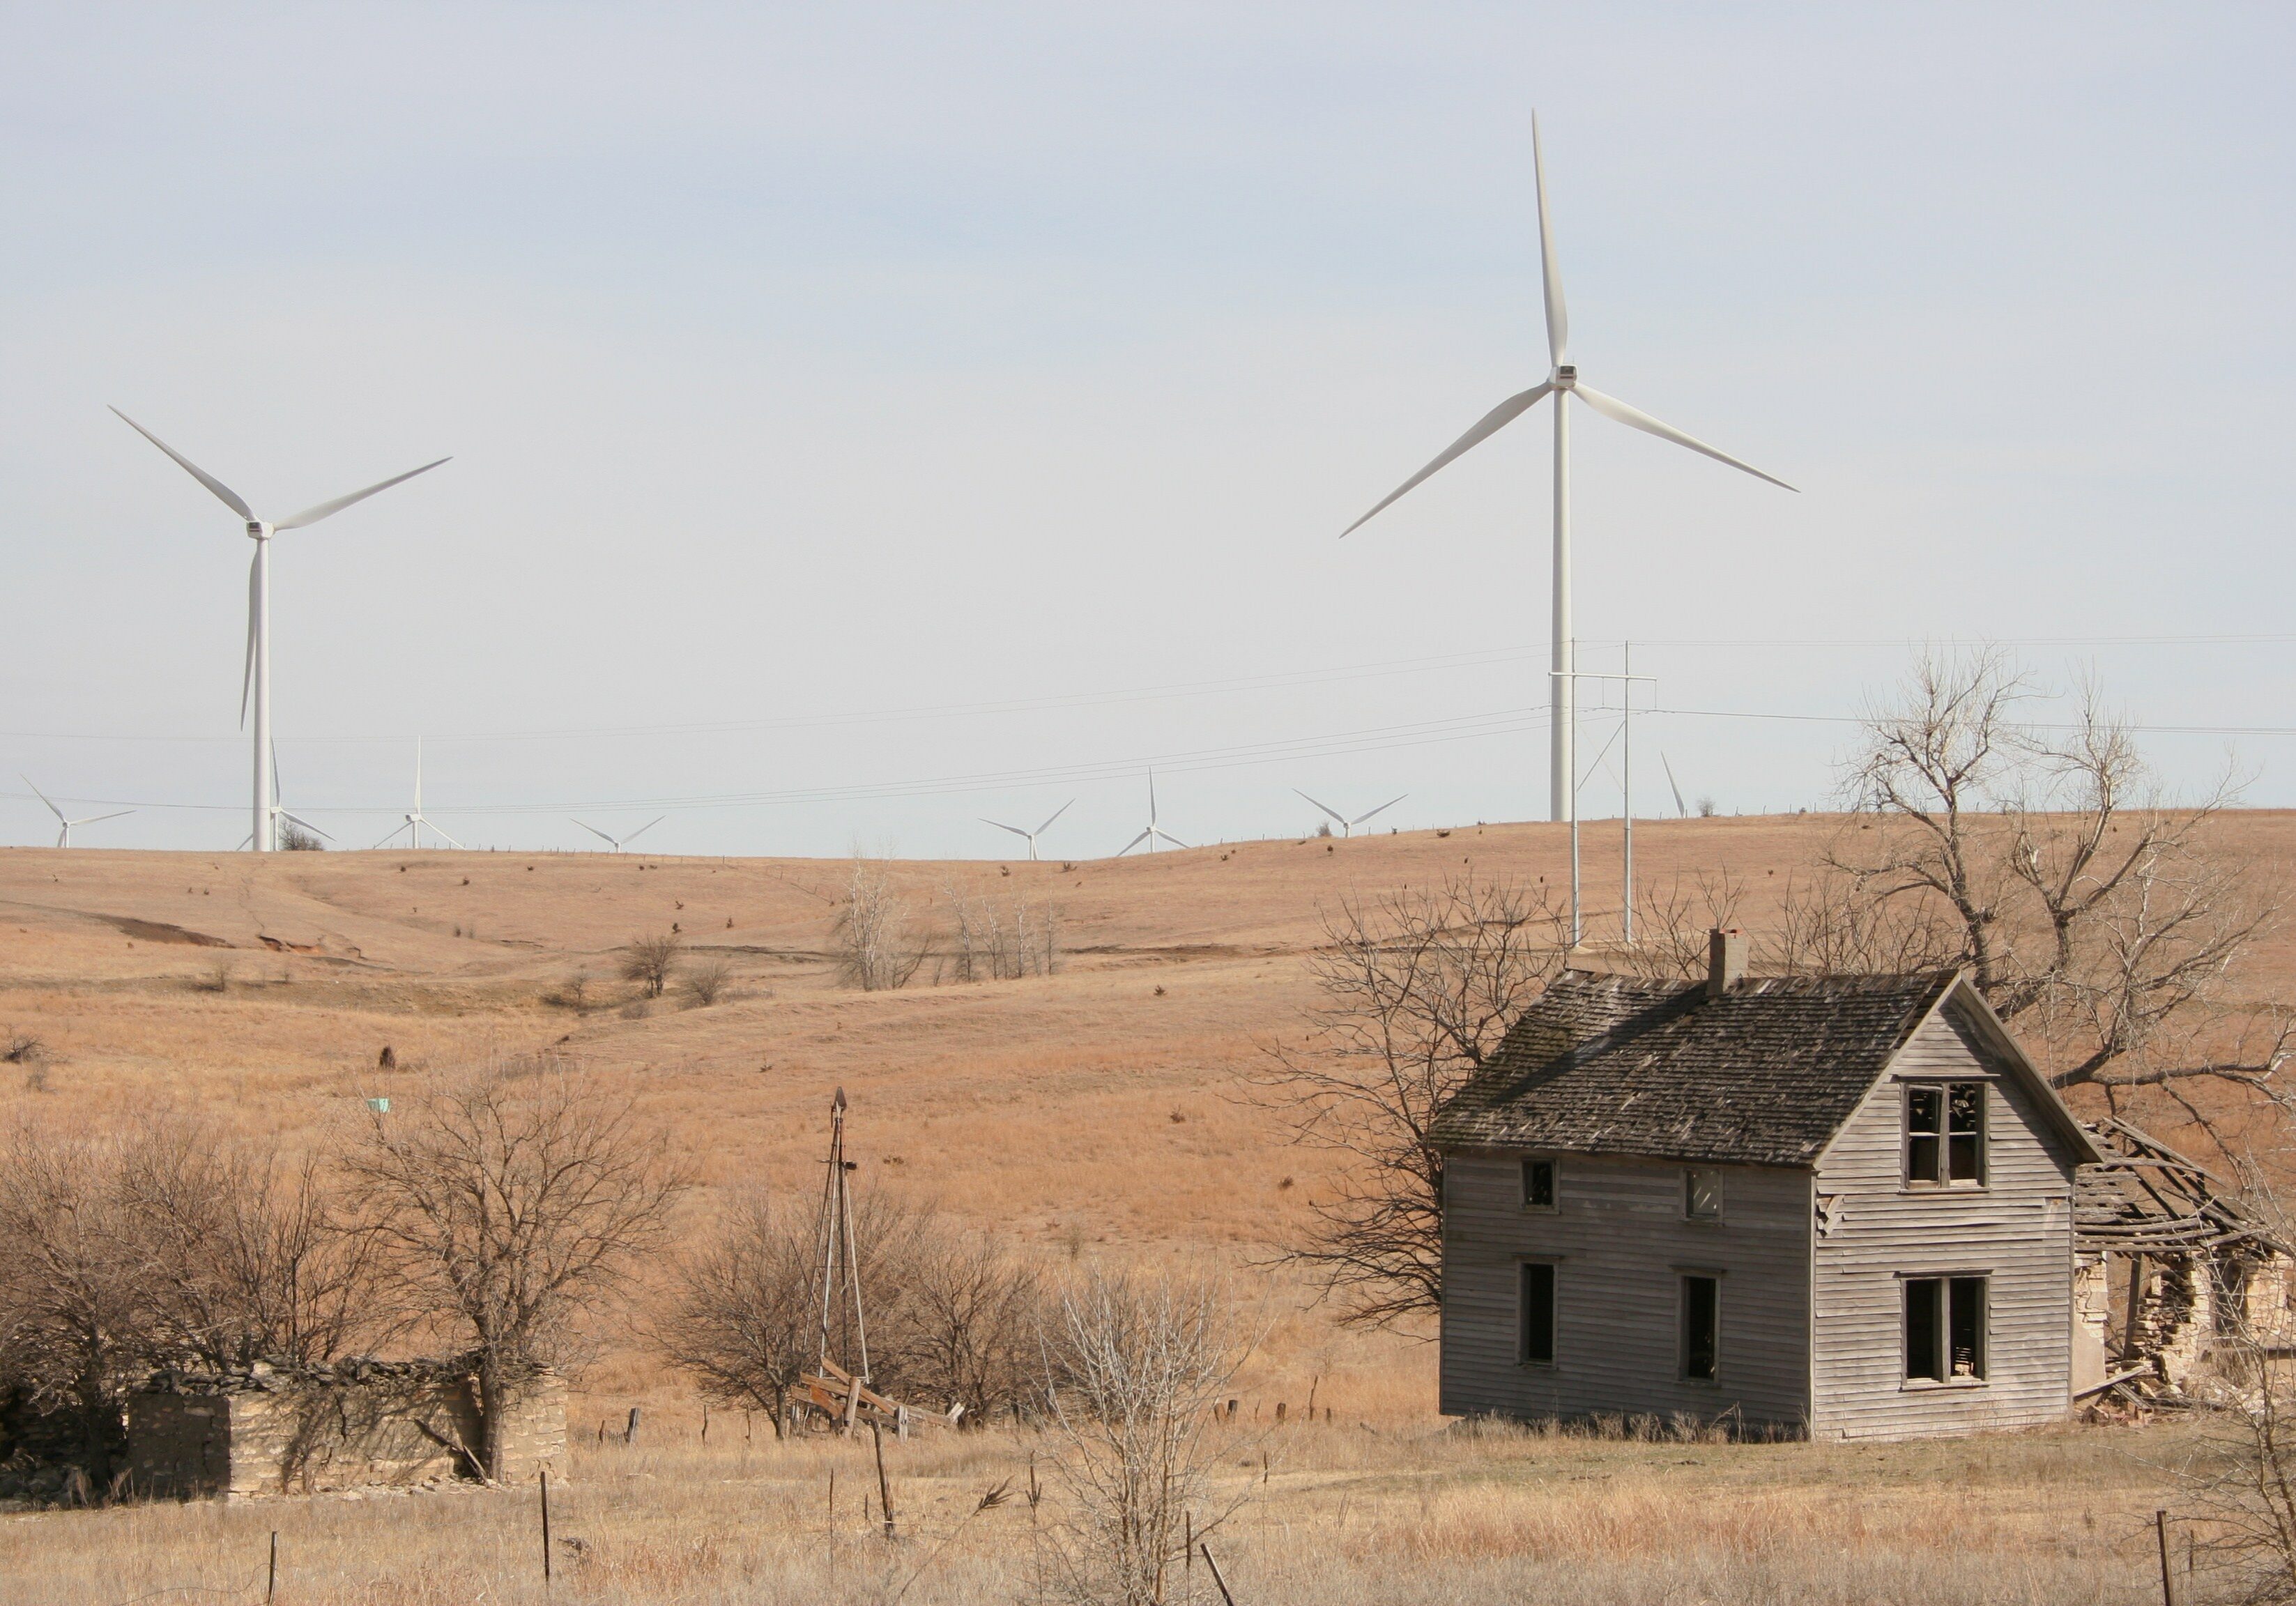 Abandoned farmhouse with turbines in background. Meridian Way Wind Farm, Cloud County, Kansas. Photo by Phil Warburg